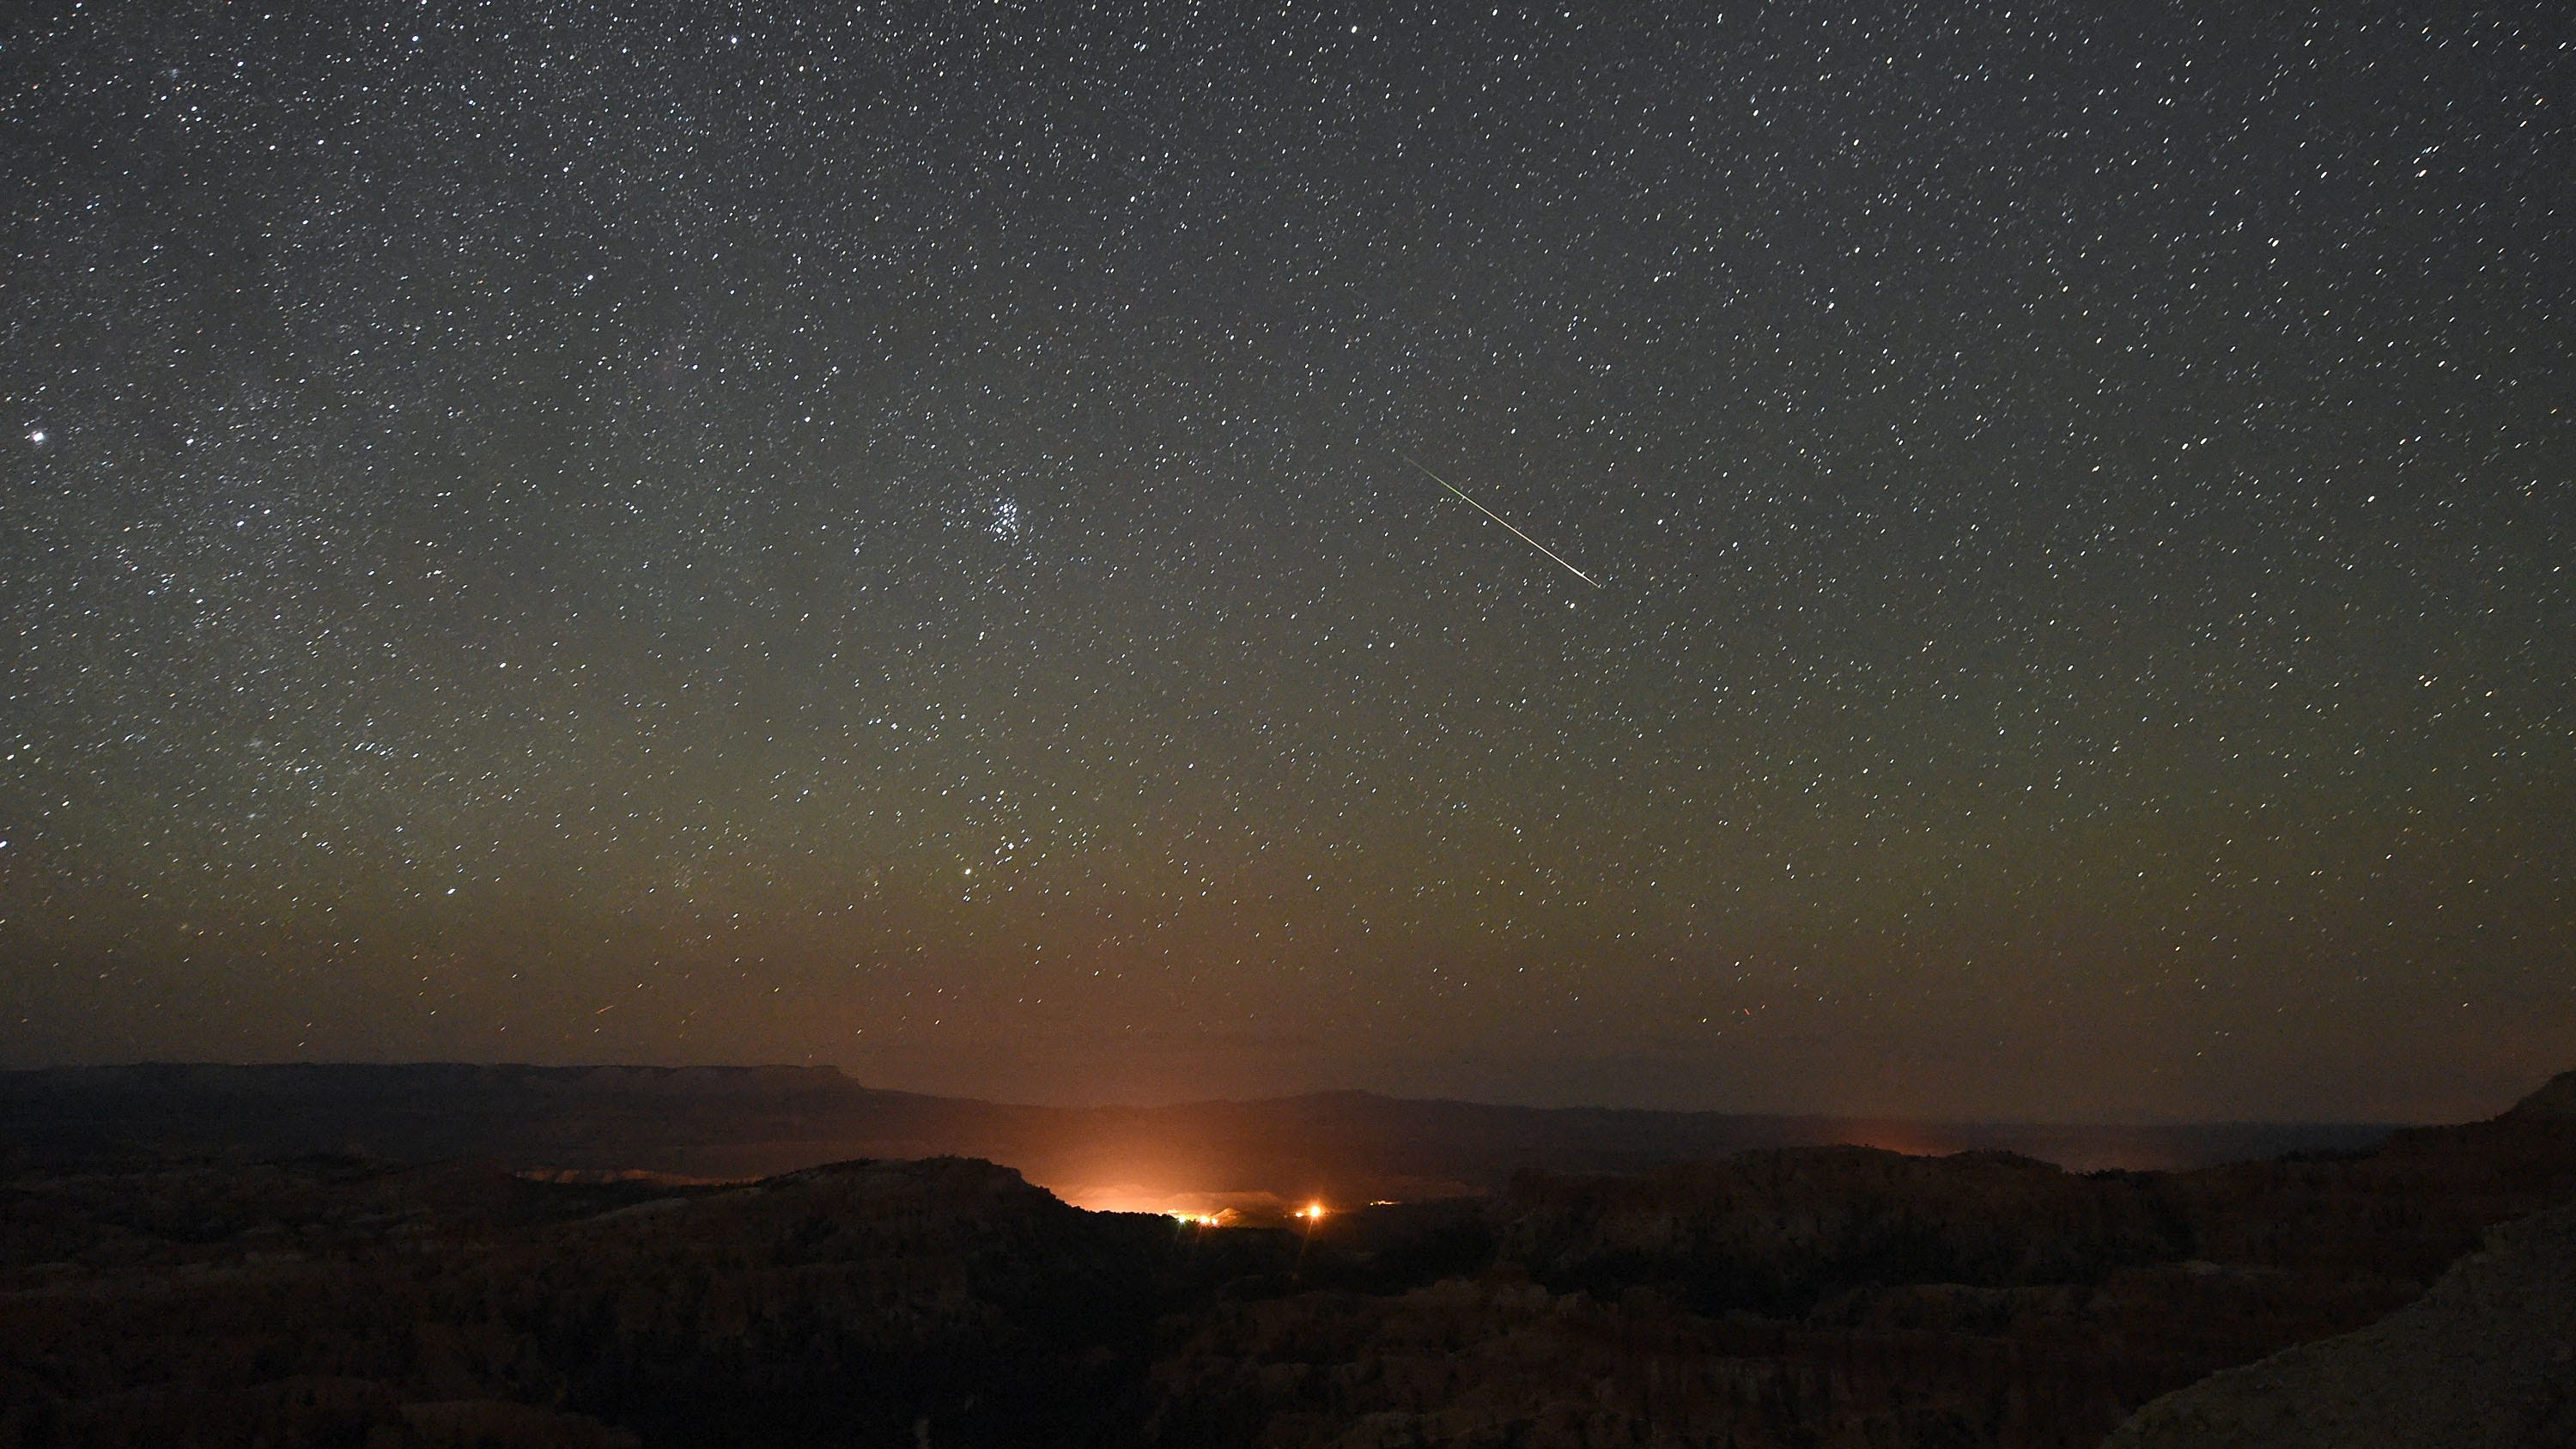 A Perseid meteor streaks across the sky above Inspiration Point early on August 12, 2016 in Bryce Canyon National Park, Utah. ( (Photo by Ethan Miller/Getty Images))